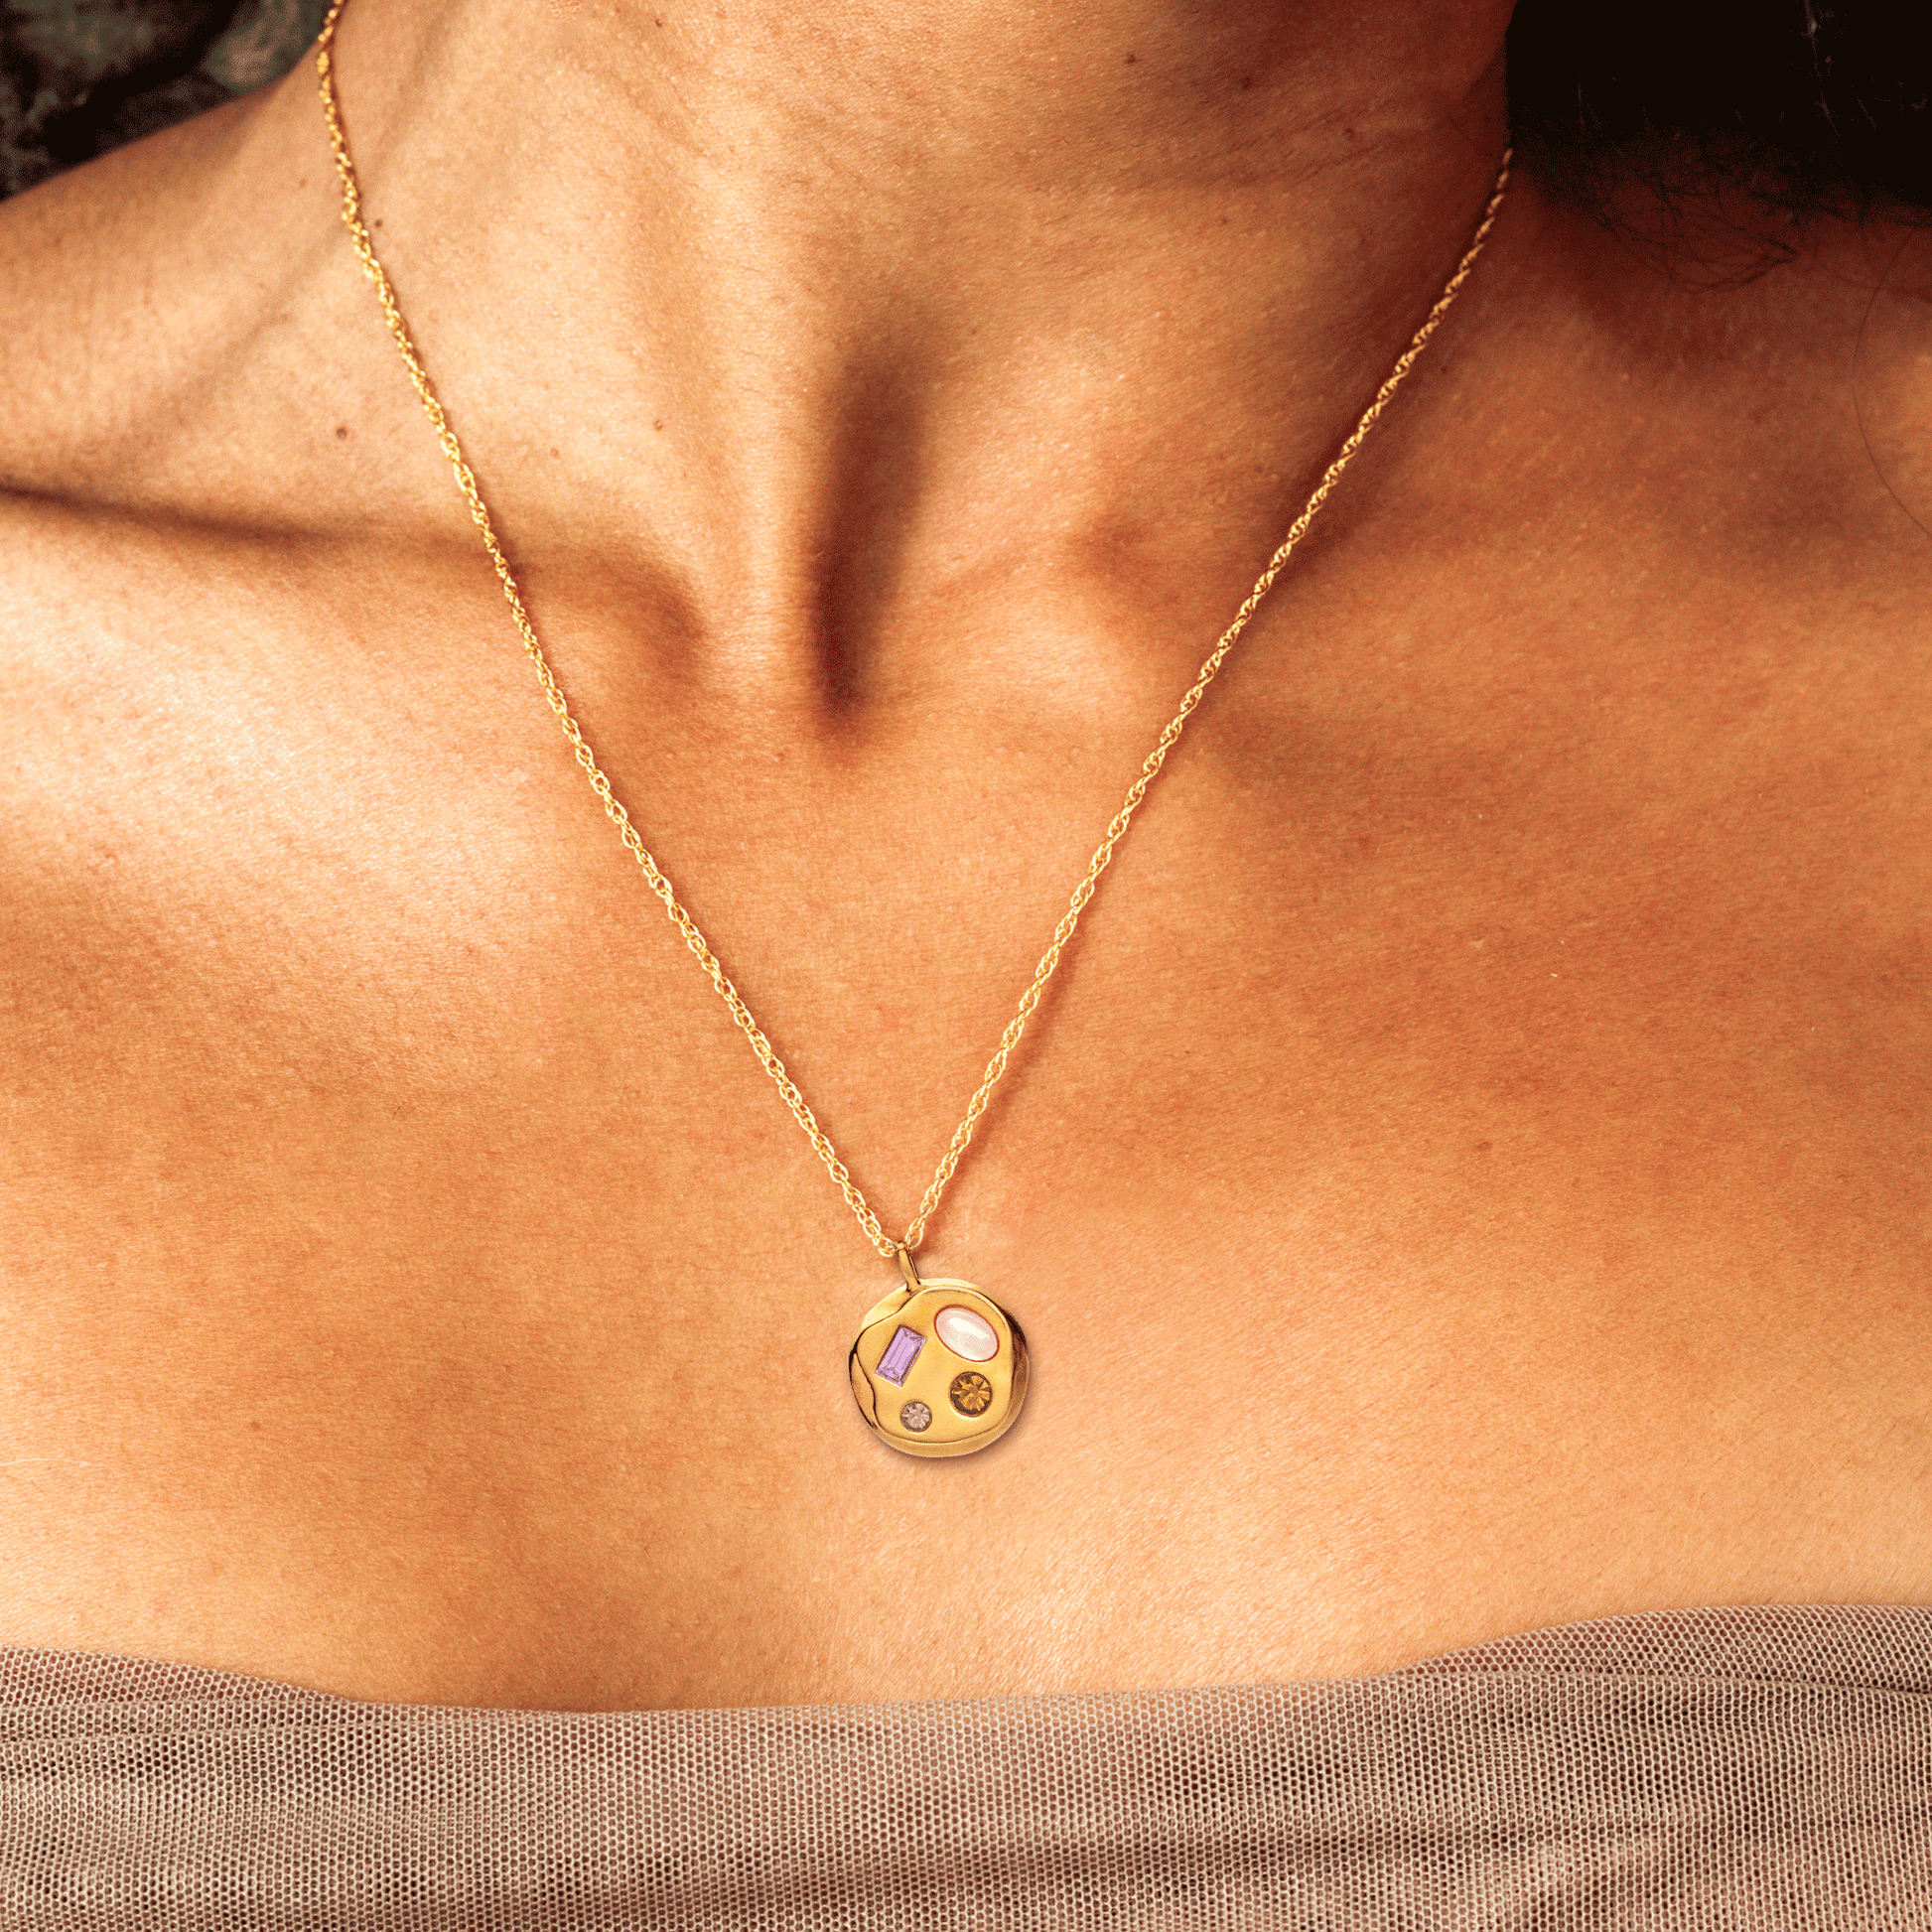 Person wearing The June Sixteenth Pendant